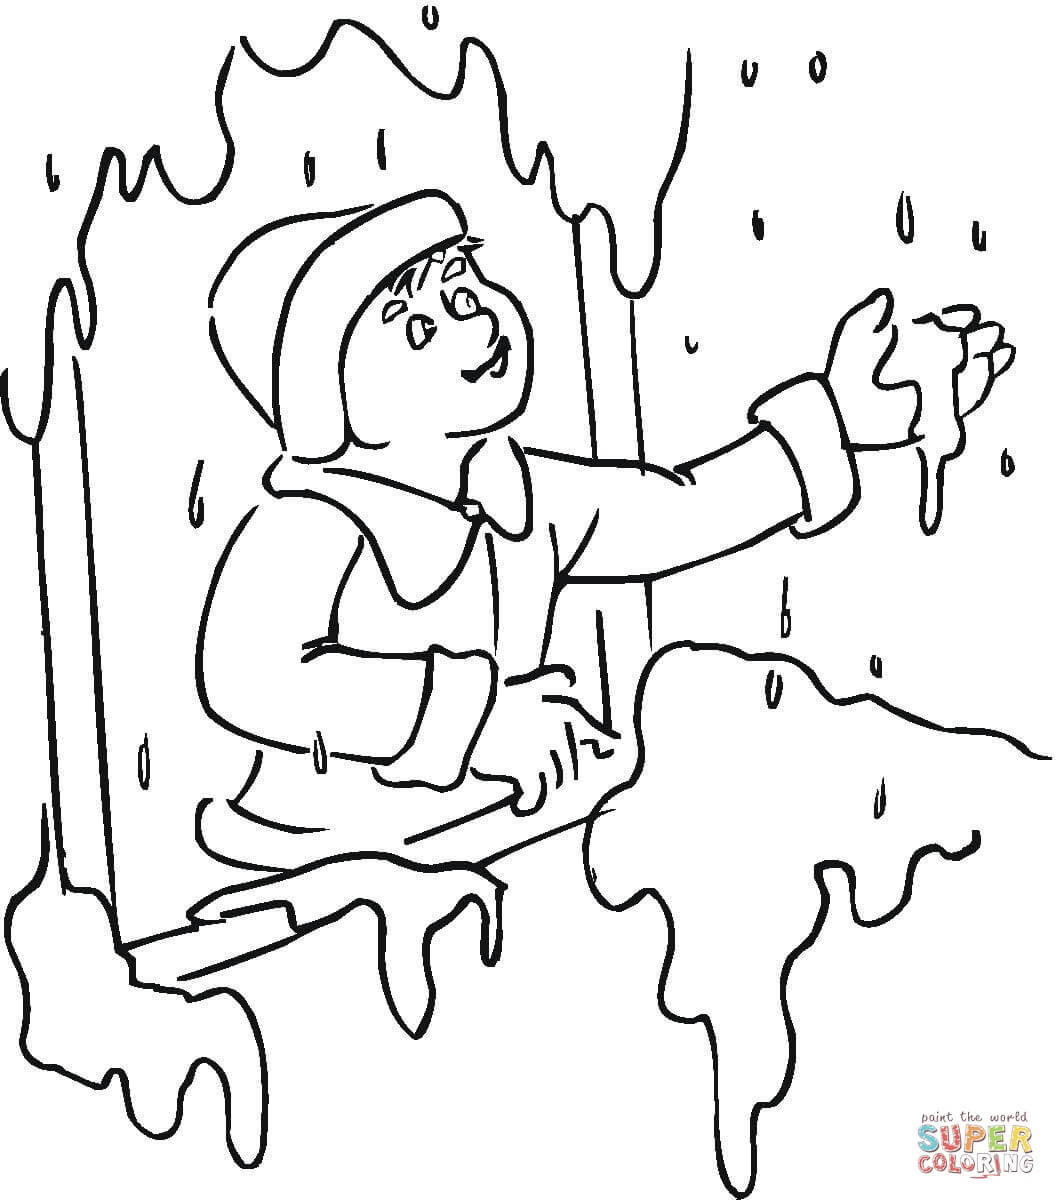 Snow coloring page | Free Printable Coloring Pages